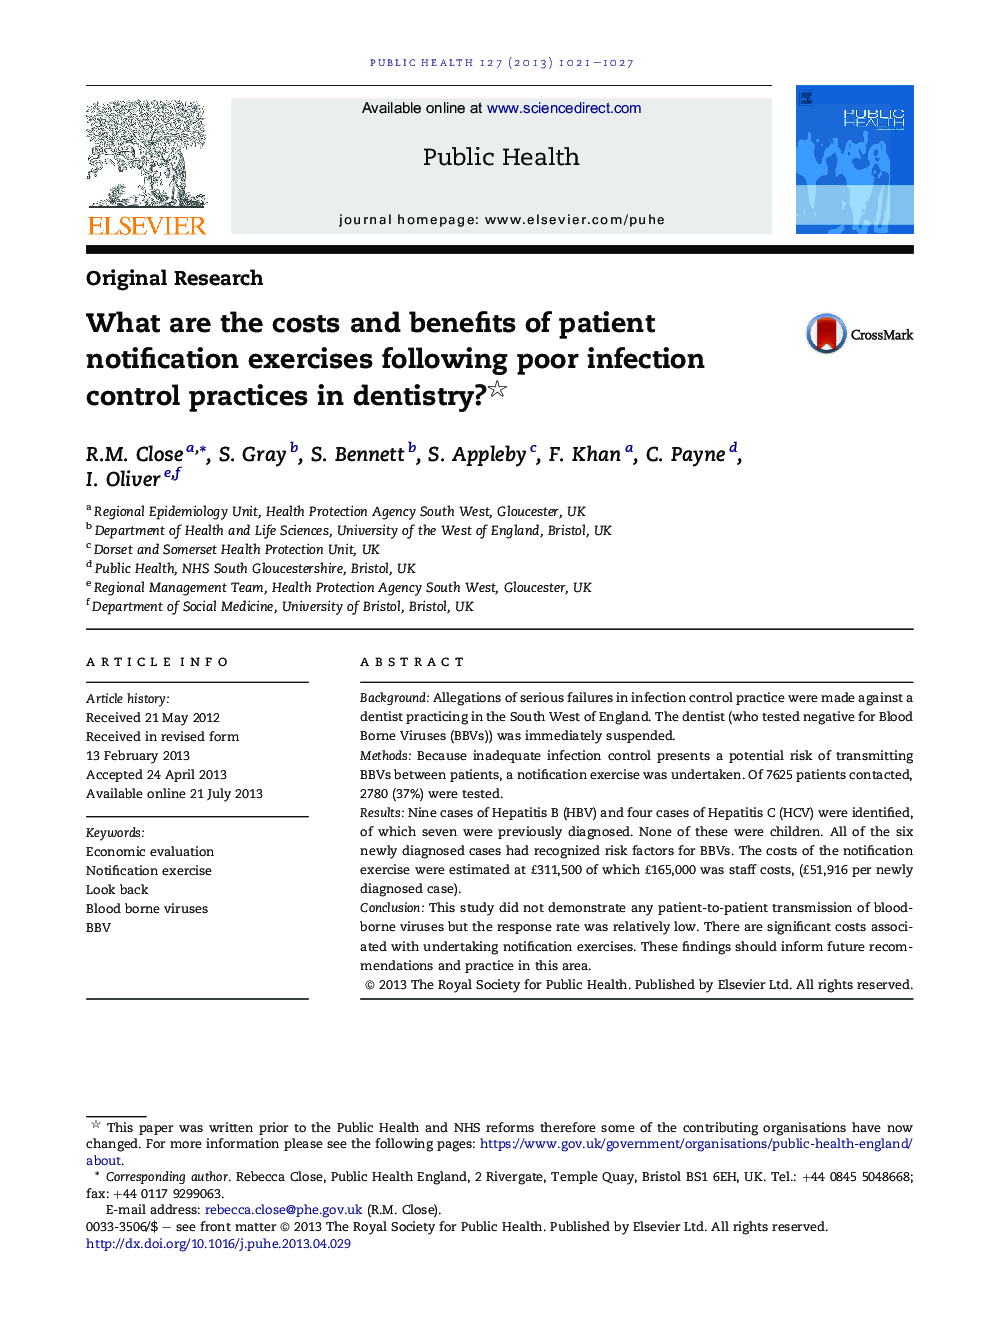 What are the costs and benefits of patient notification exercises following poor infection control practices in dentistry? 